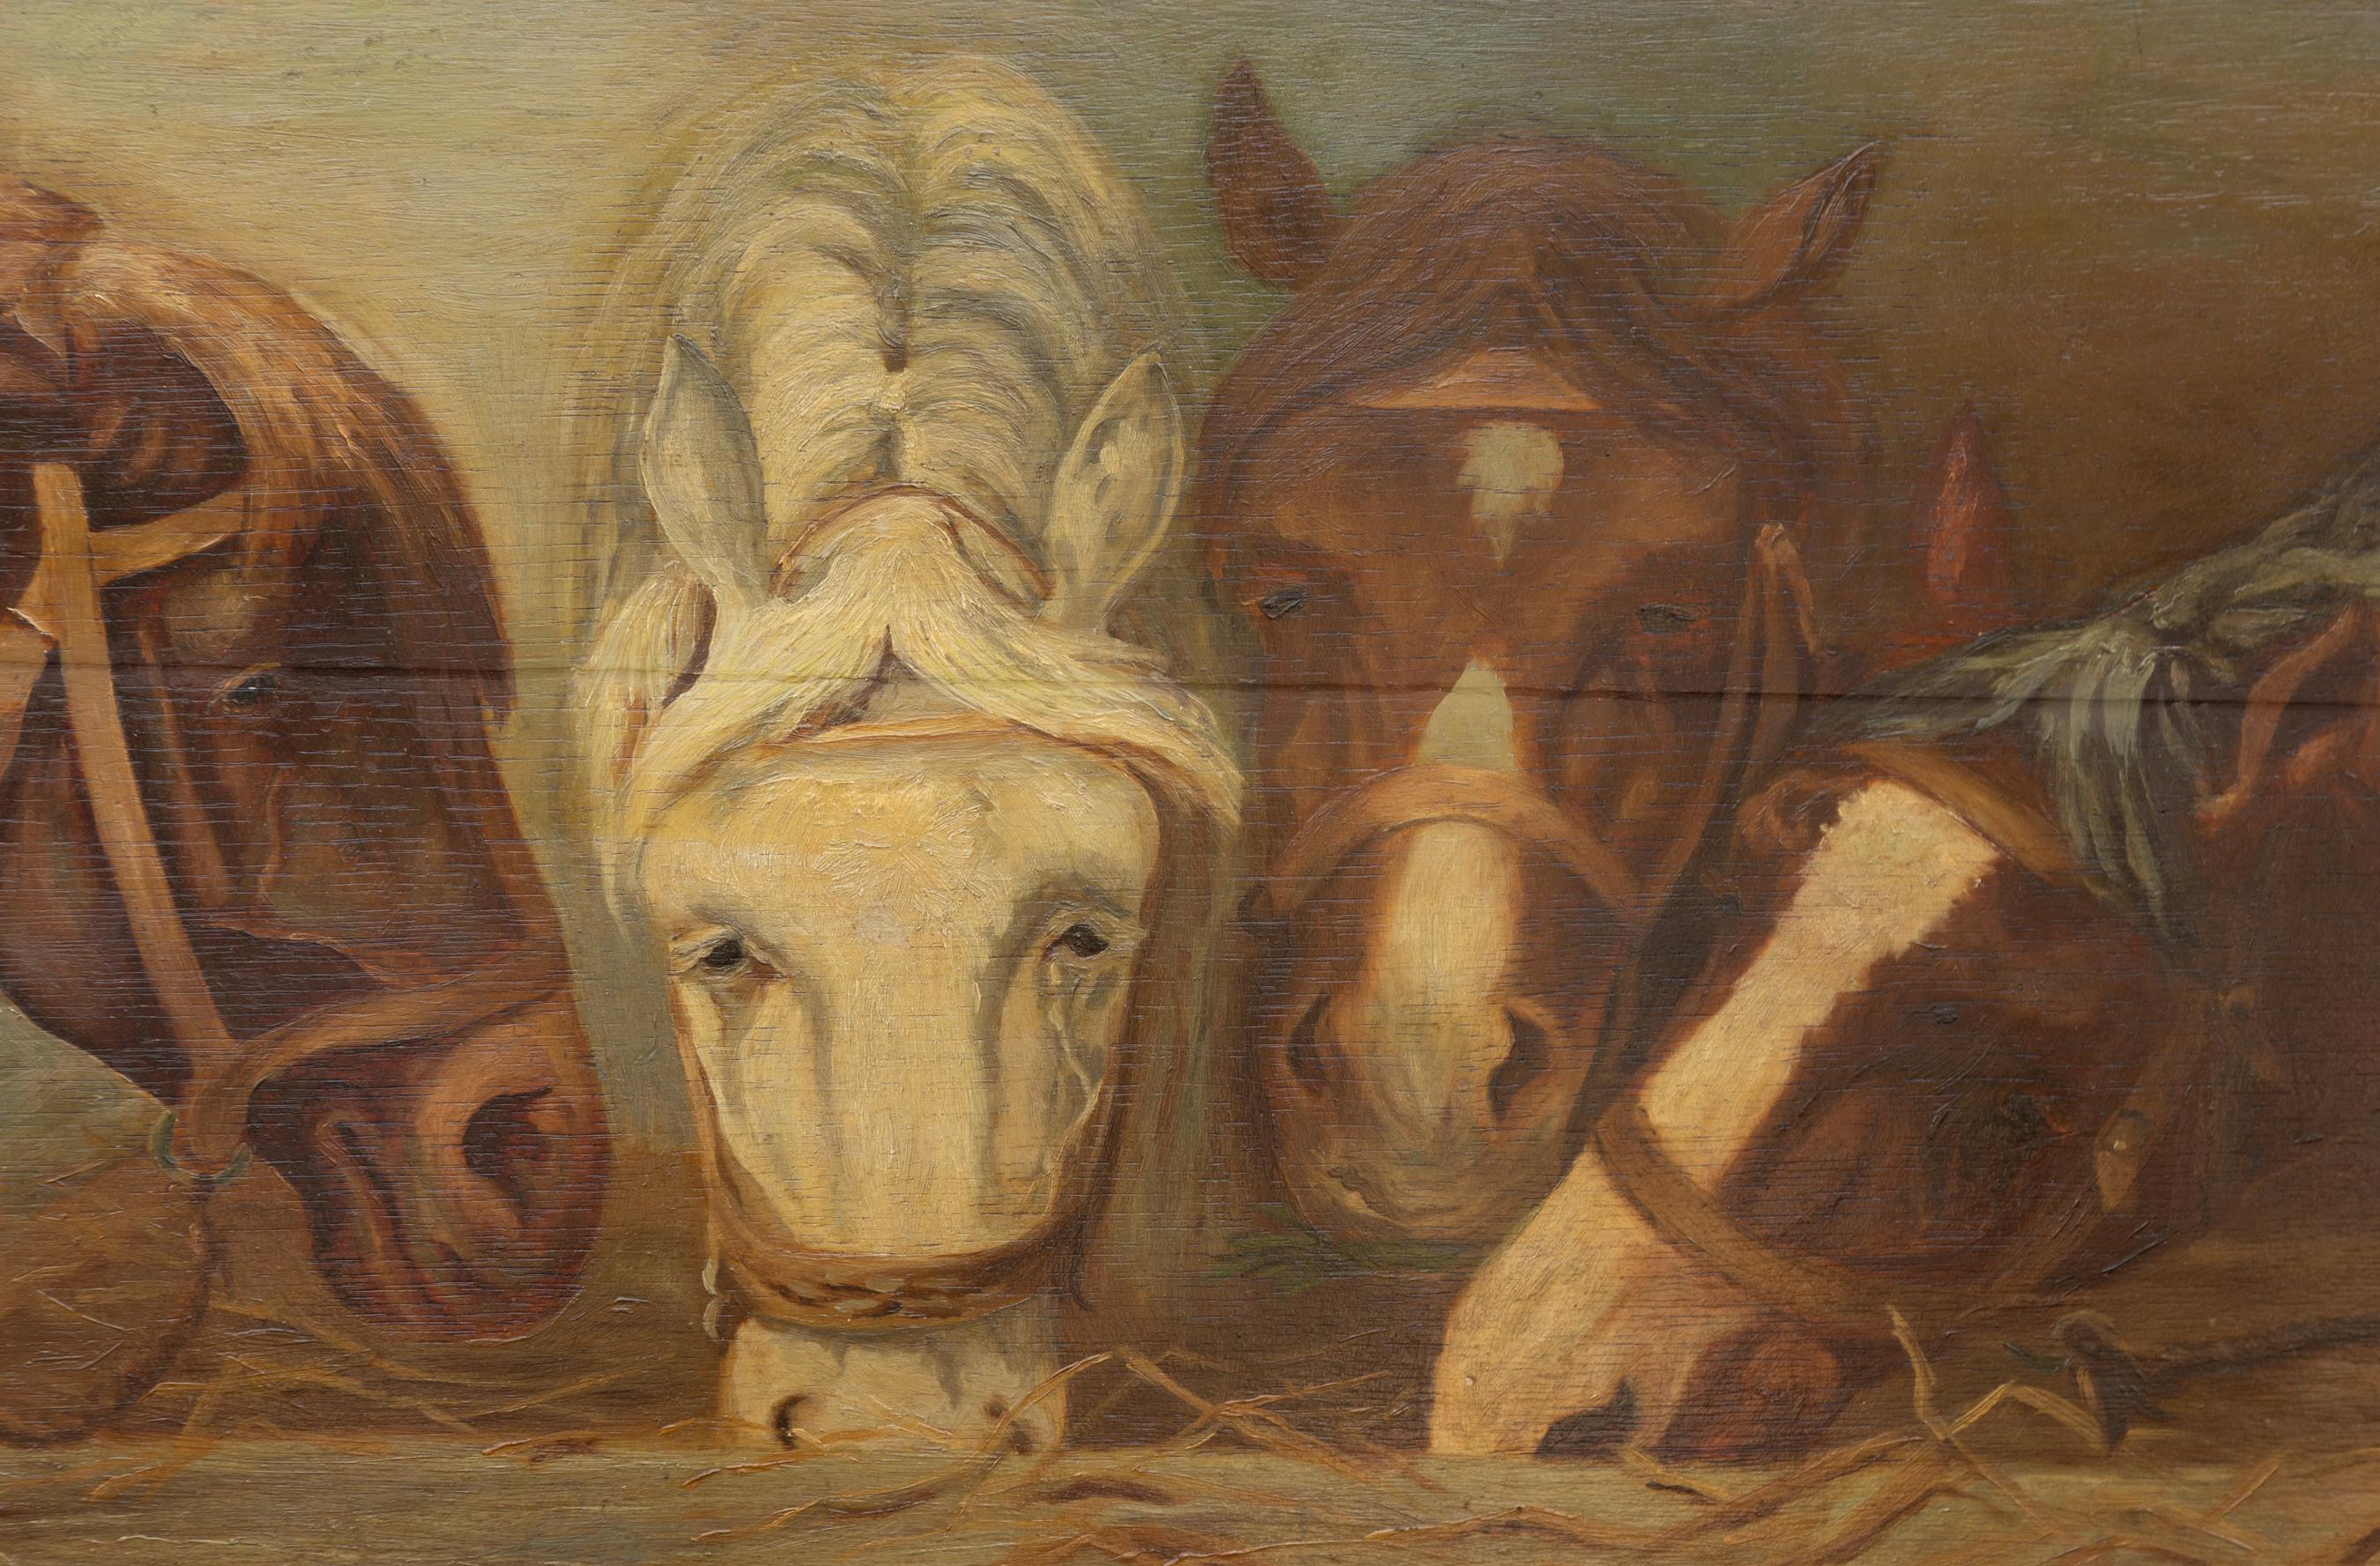 Wood English 1900s Oil on Board Painting Depicting Horses Feeding from a Trough